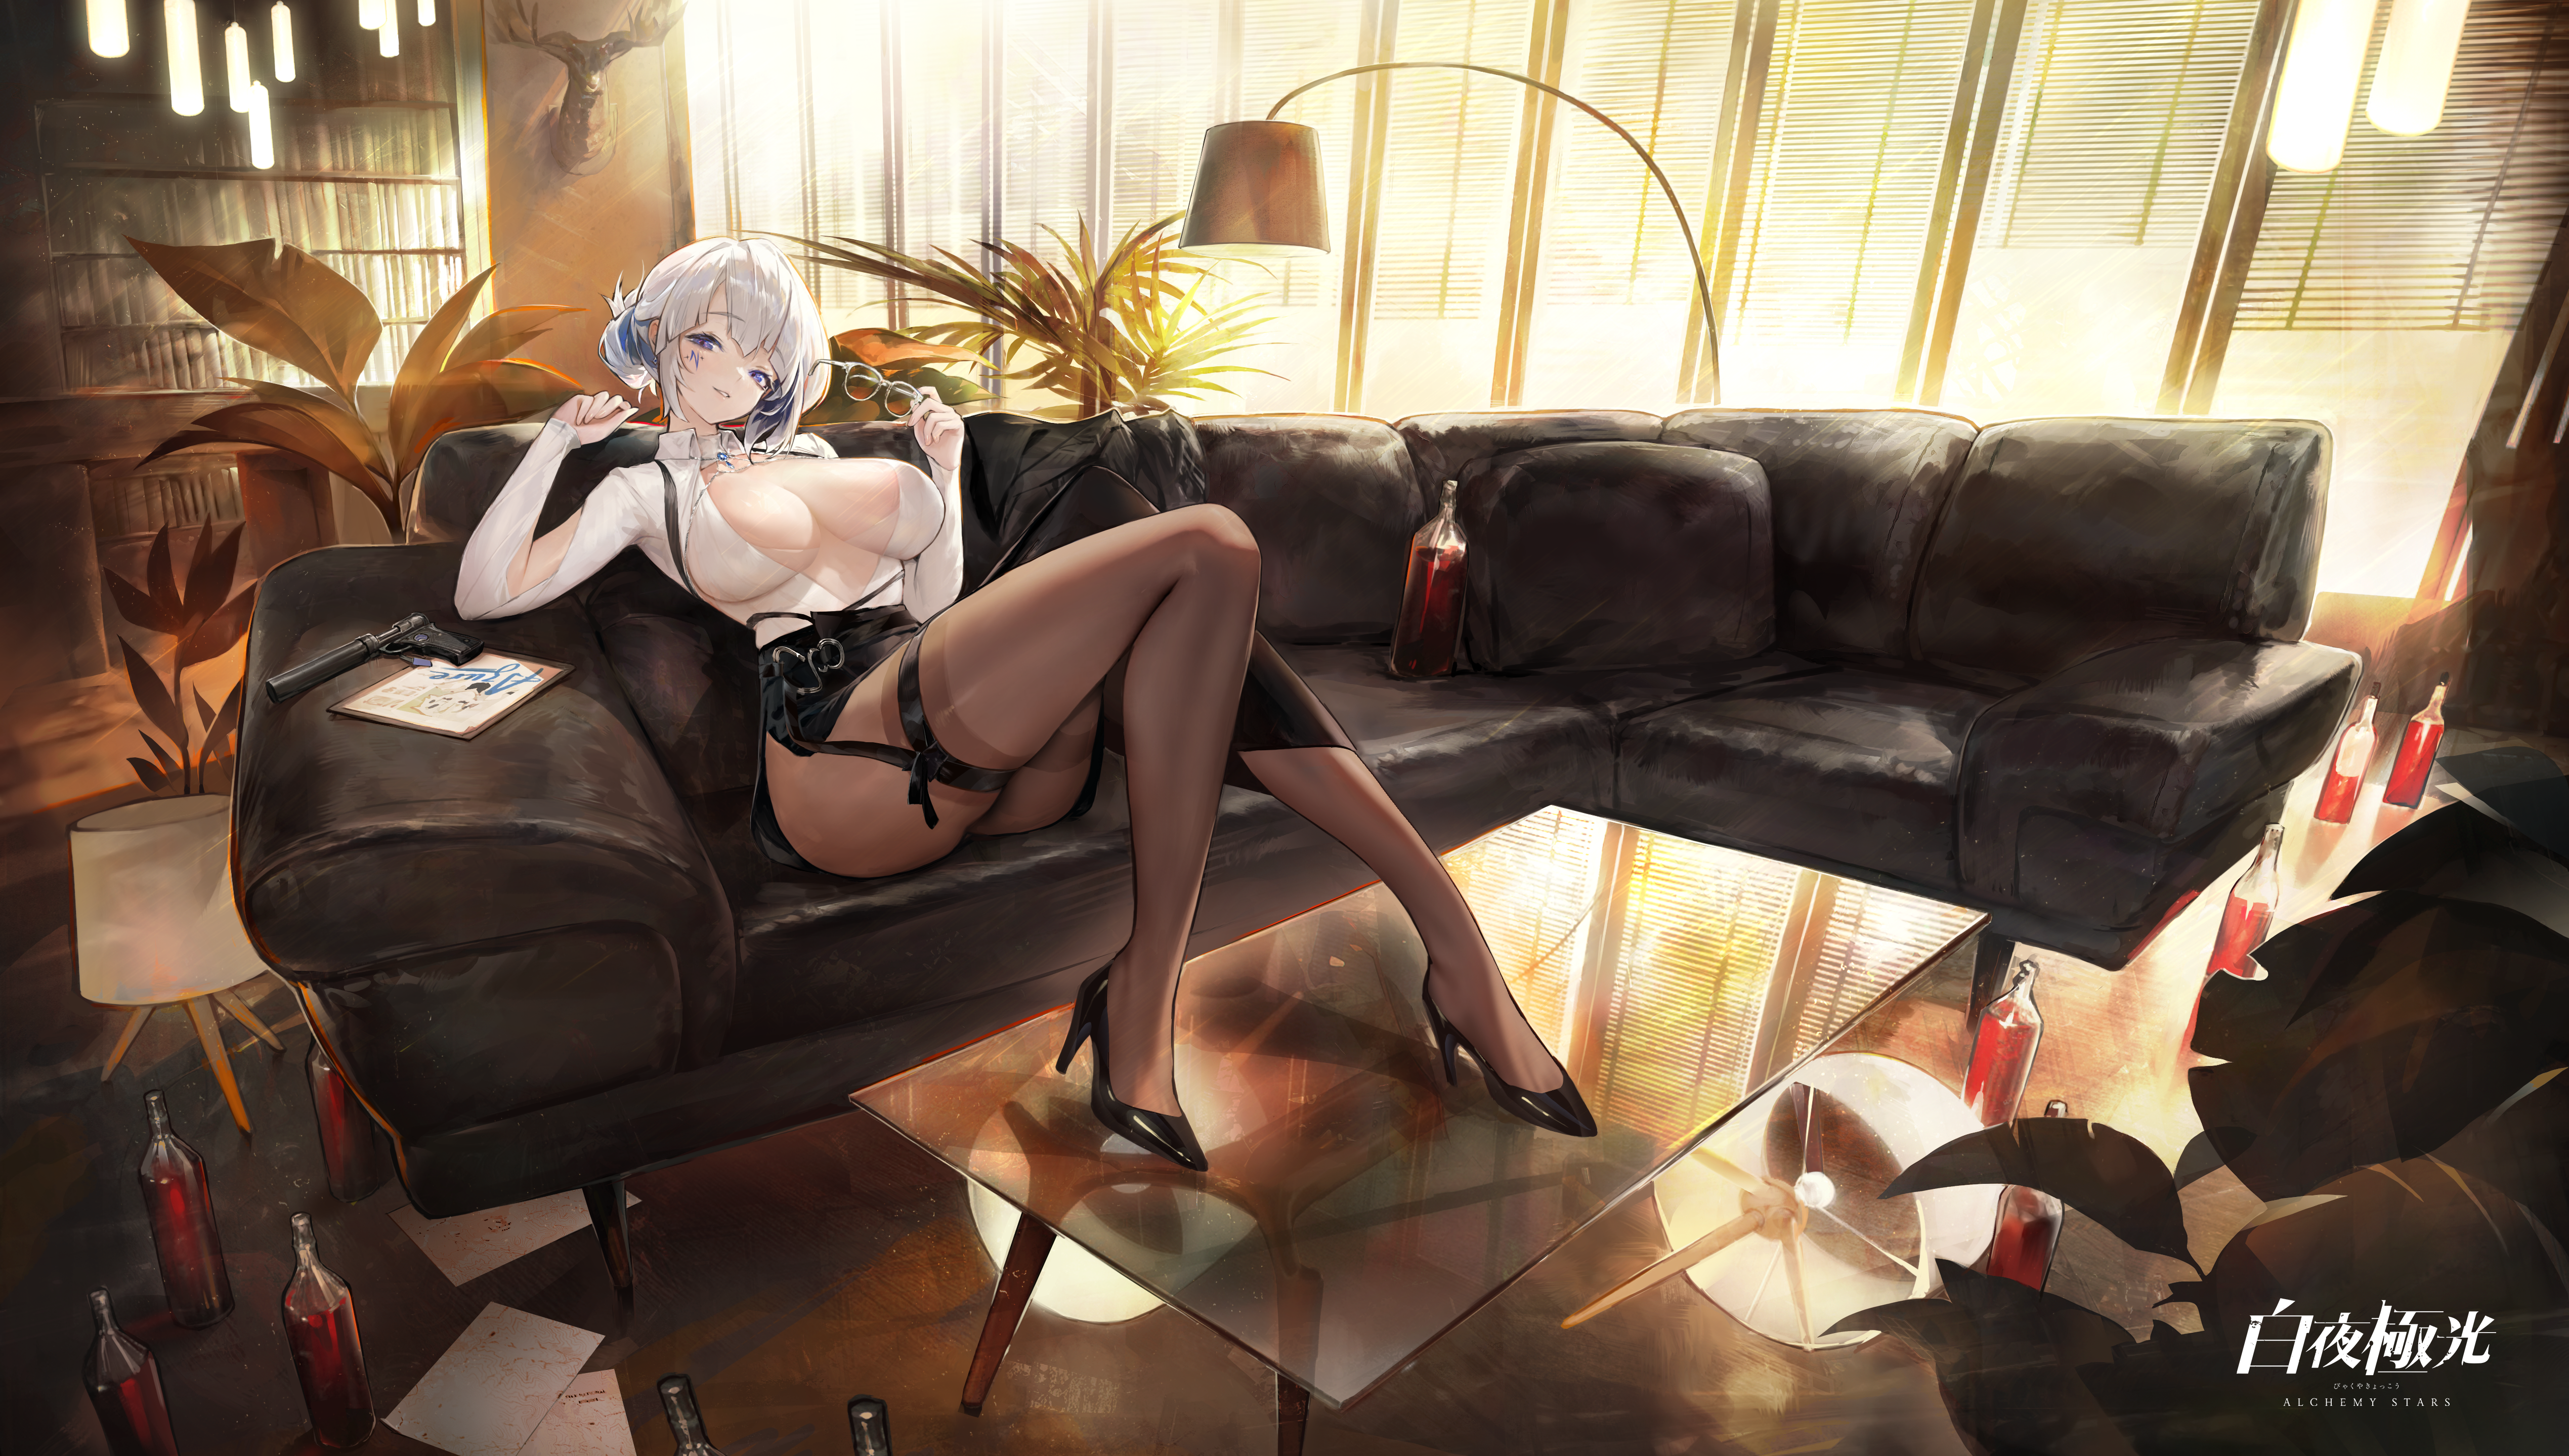 Anime 5078x2878 anime anime girls Alchemy Stars sitting big boobs pantyhose heels couch leaves alcohol Japanese plants looking at viewer sunglasses smiling open shirt Azure (Alchemy Stars)